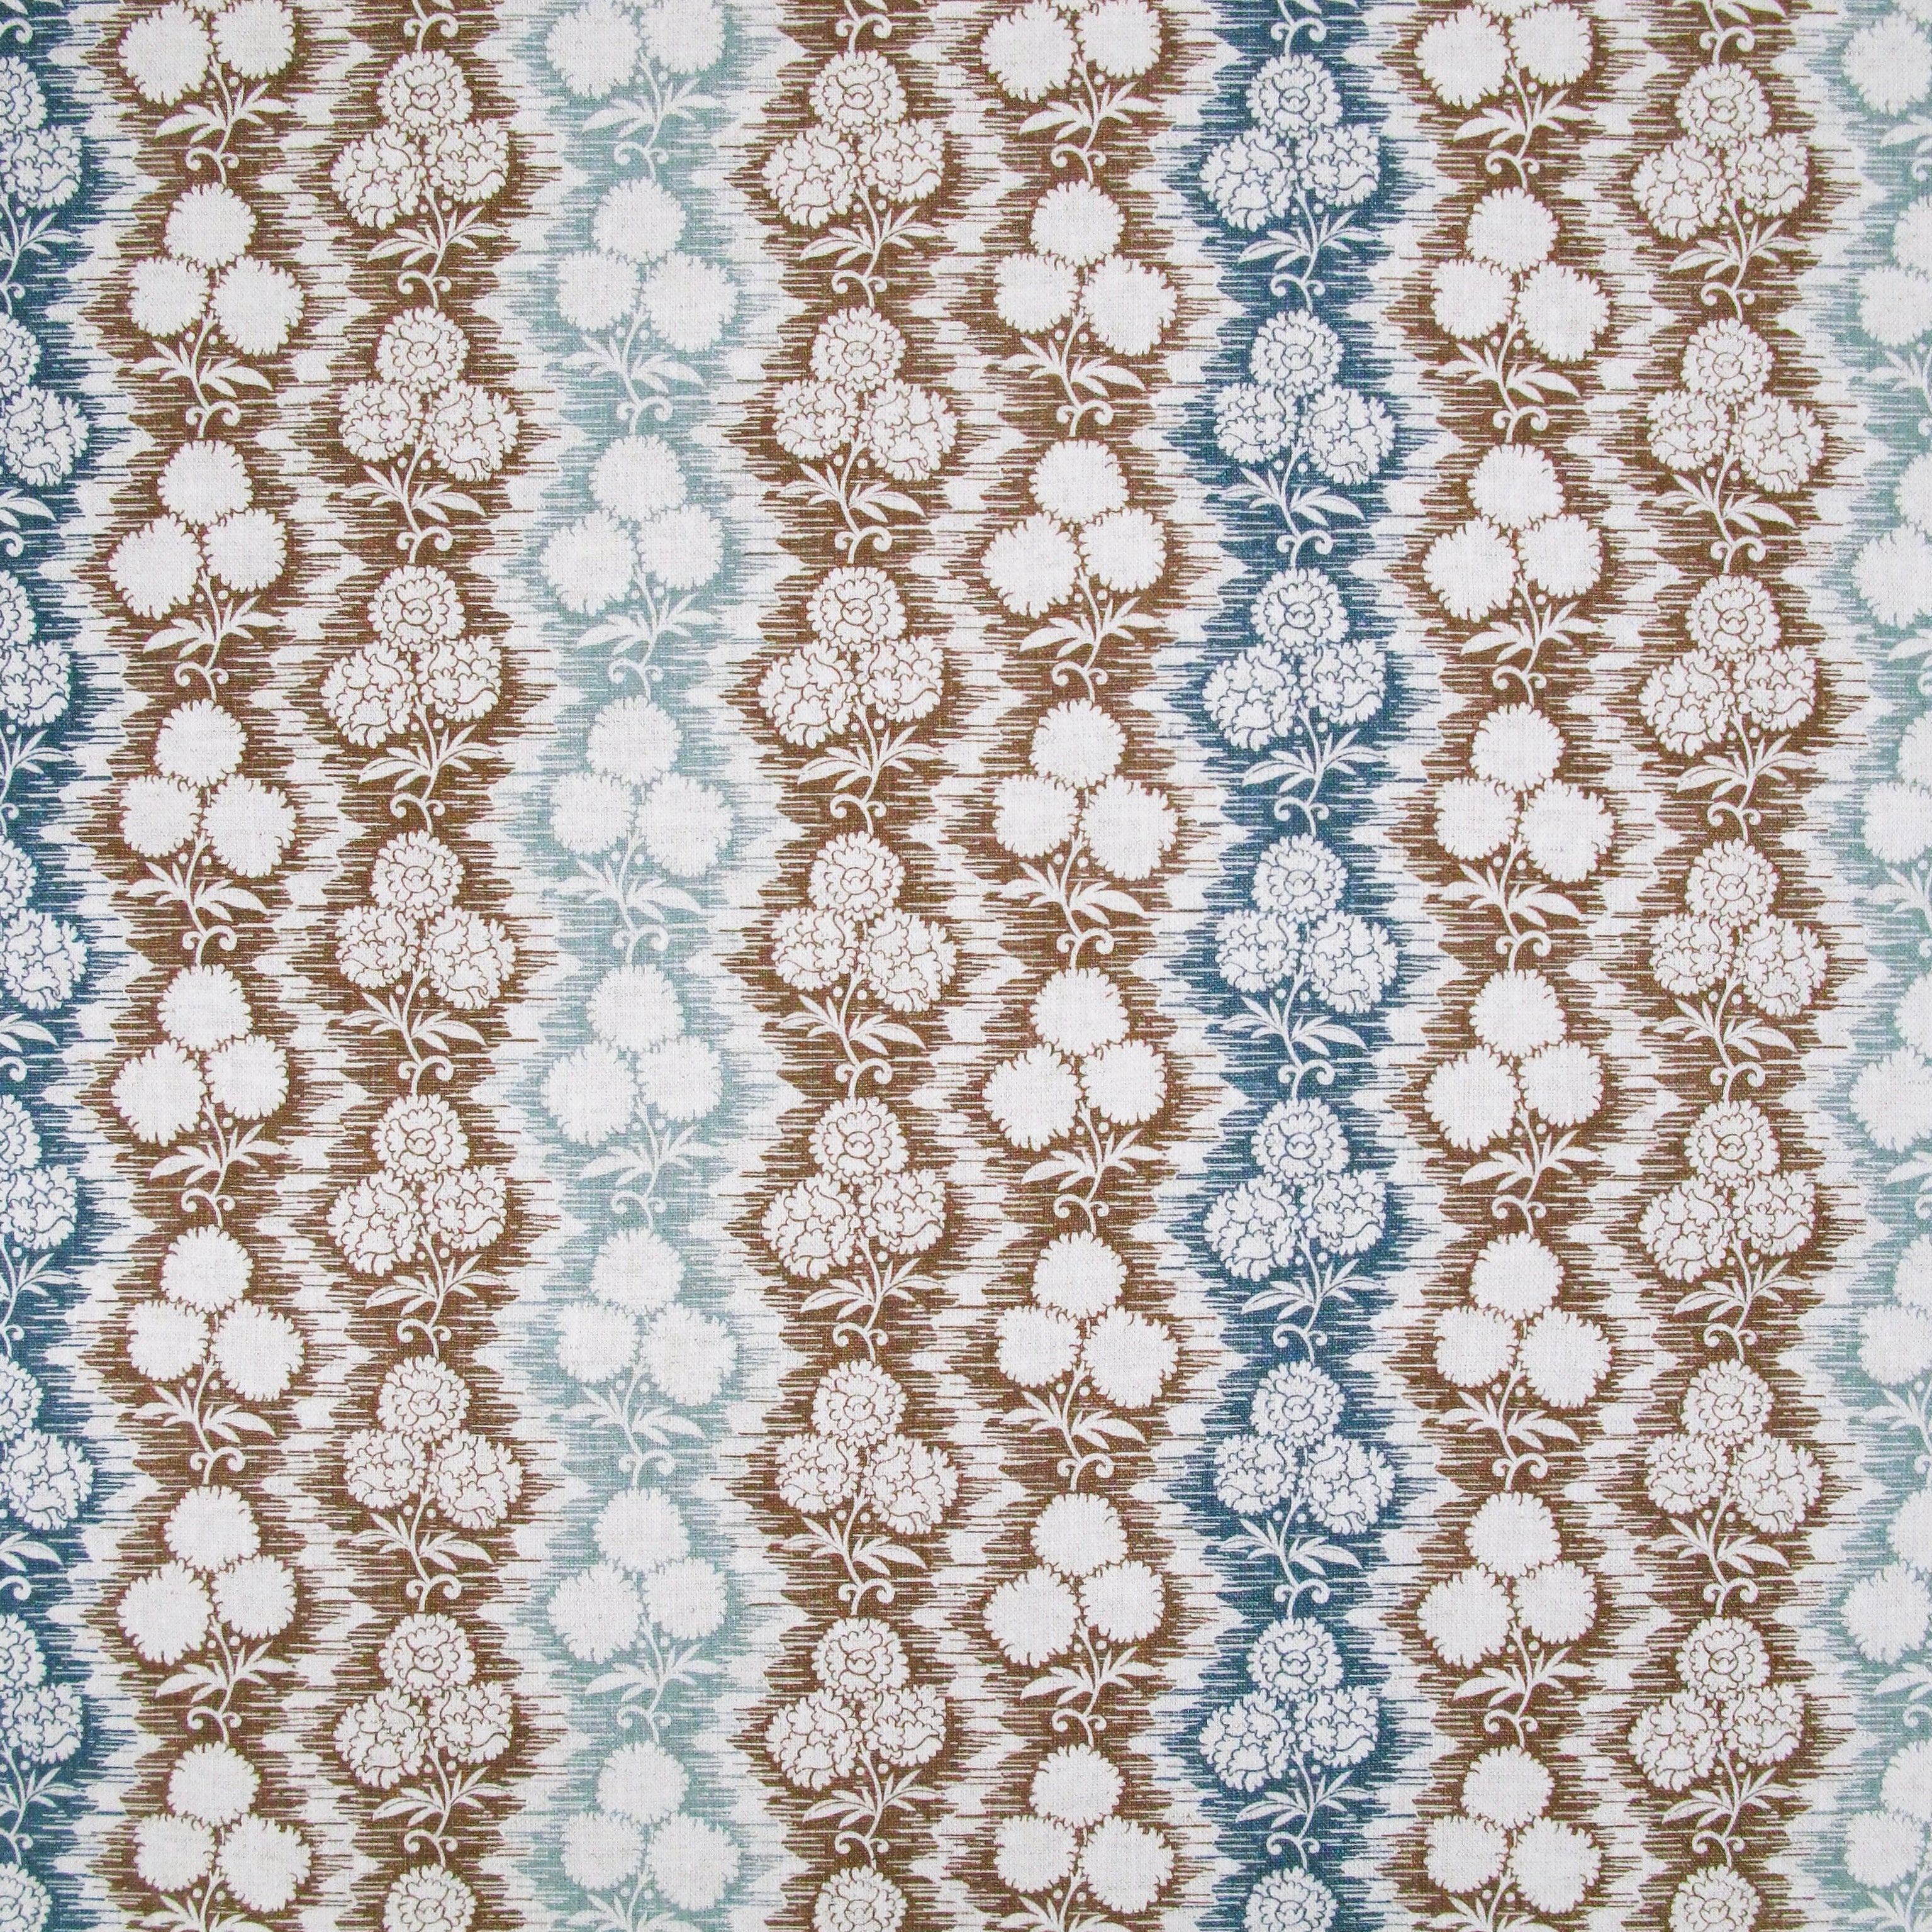 Fabric in a detailed botanical stripe print in shades of blue and brown on a white field.